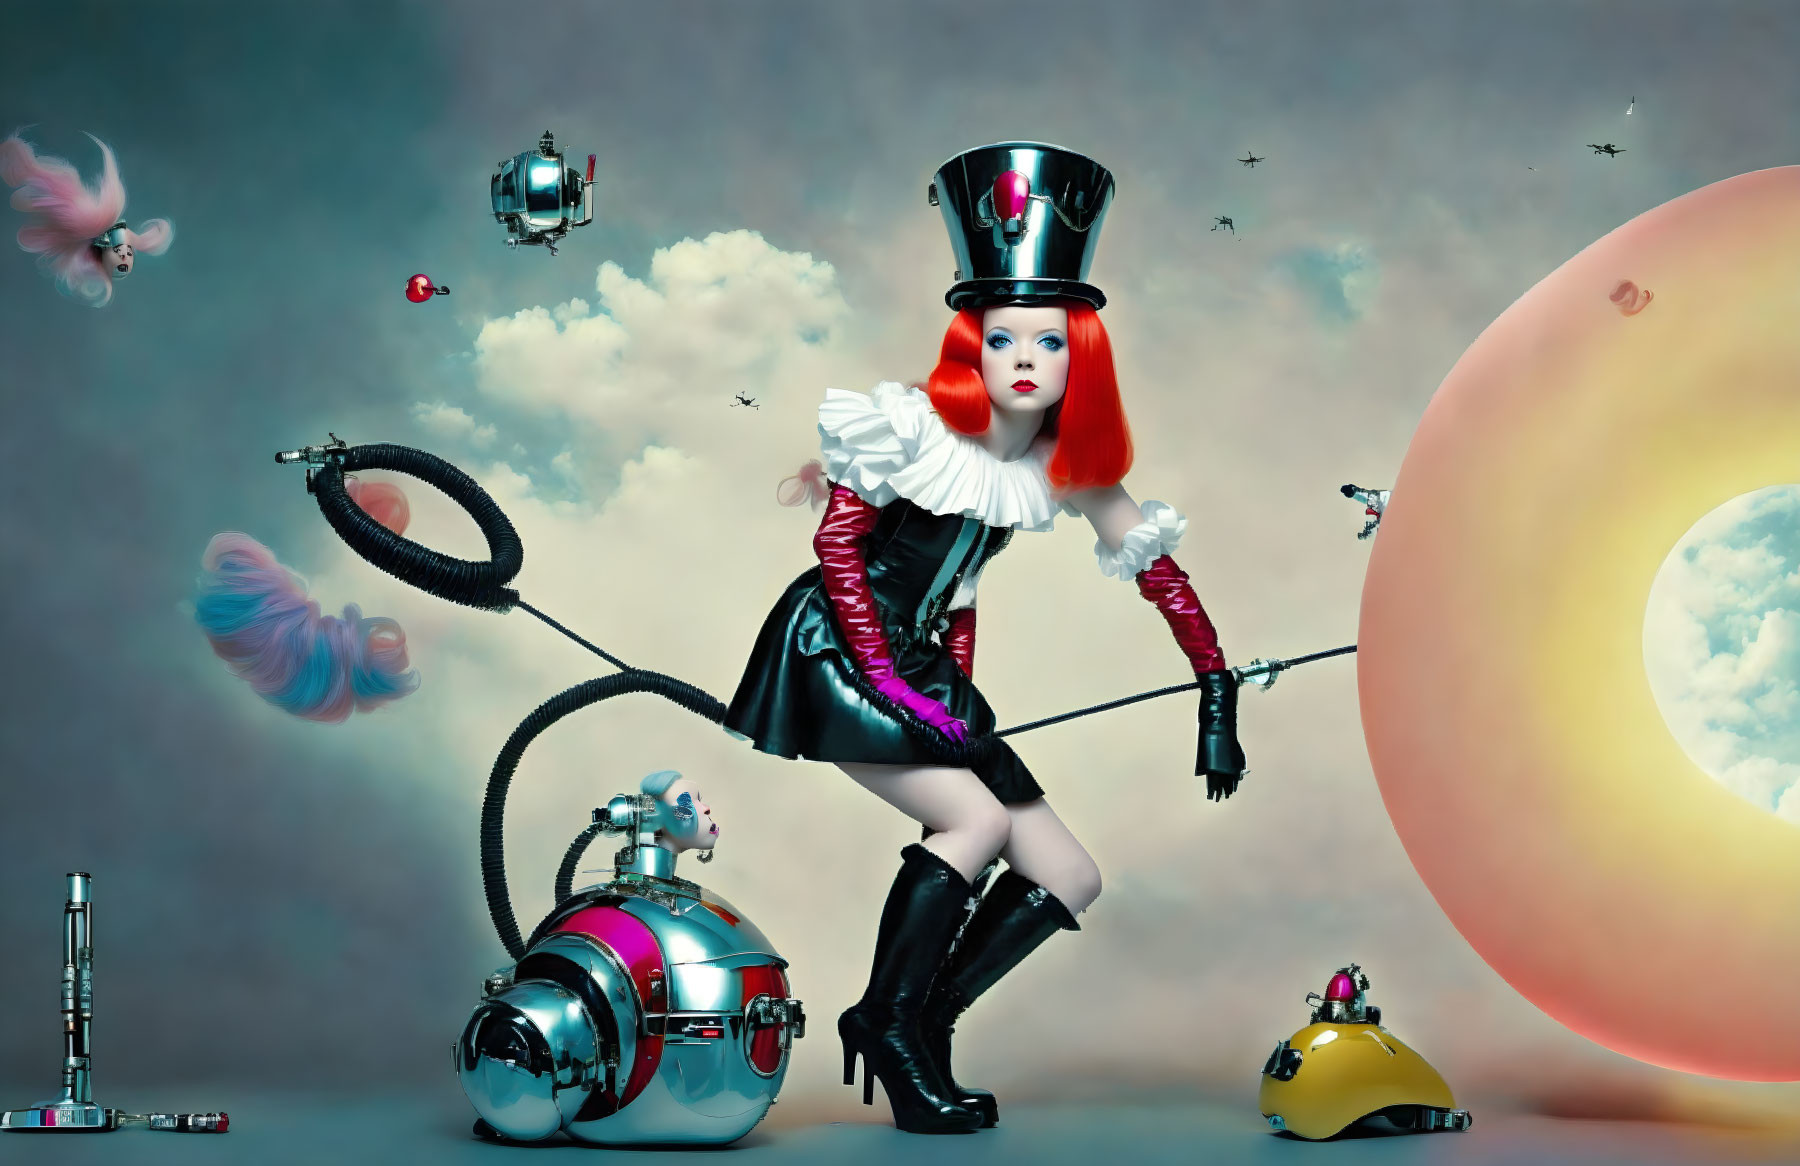 Surreal image: Woman with whips, robots, planet, and floating islands